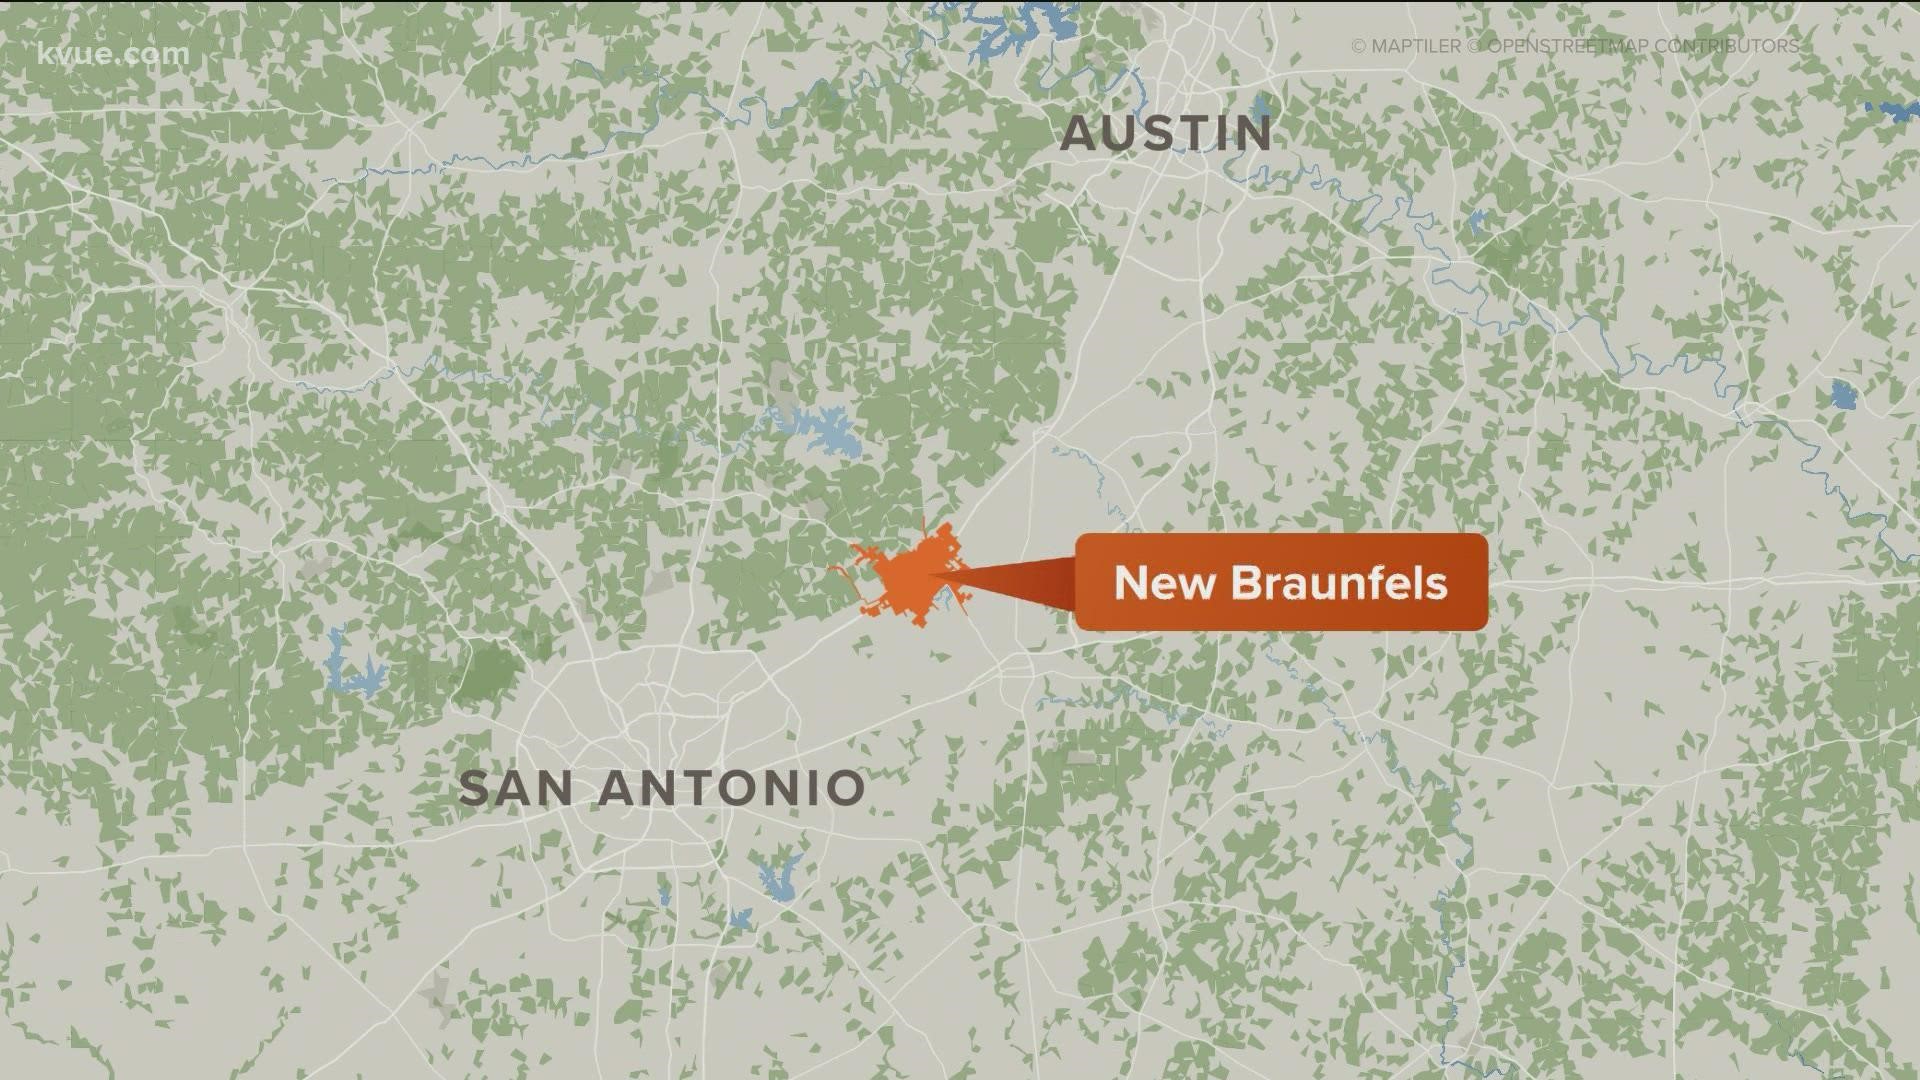 New Braunfels grows 56 in 10 years, census data show